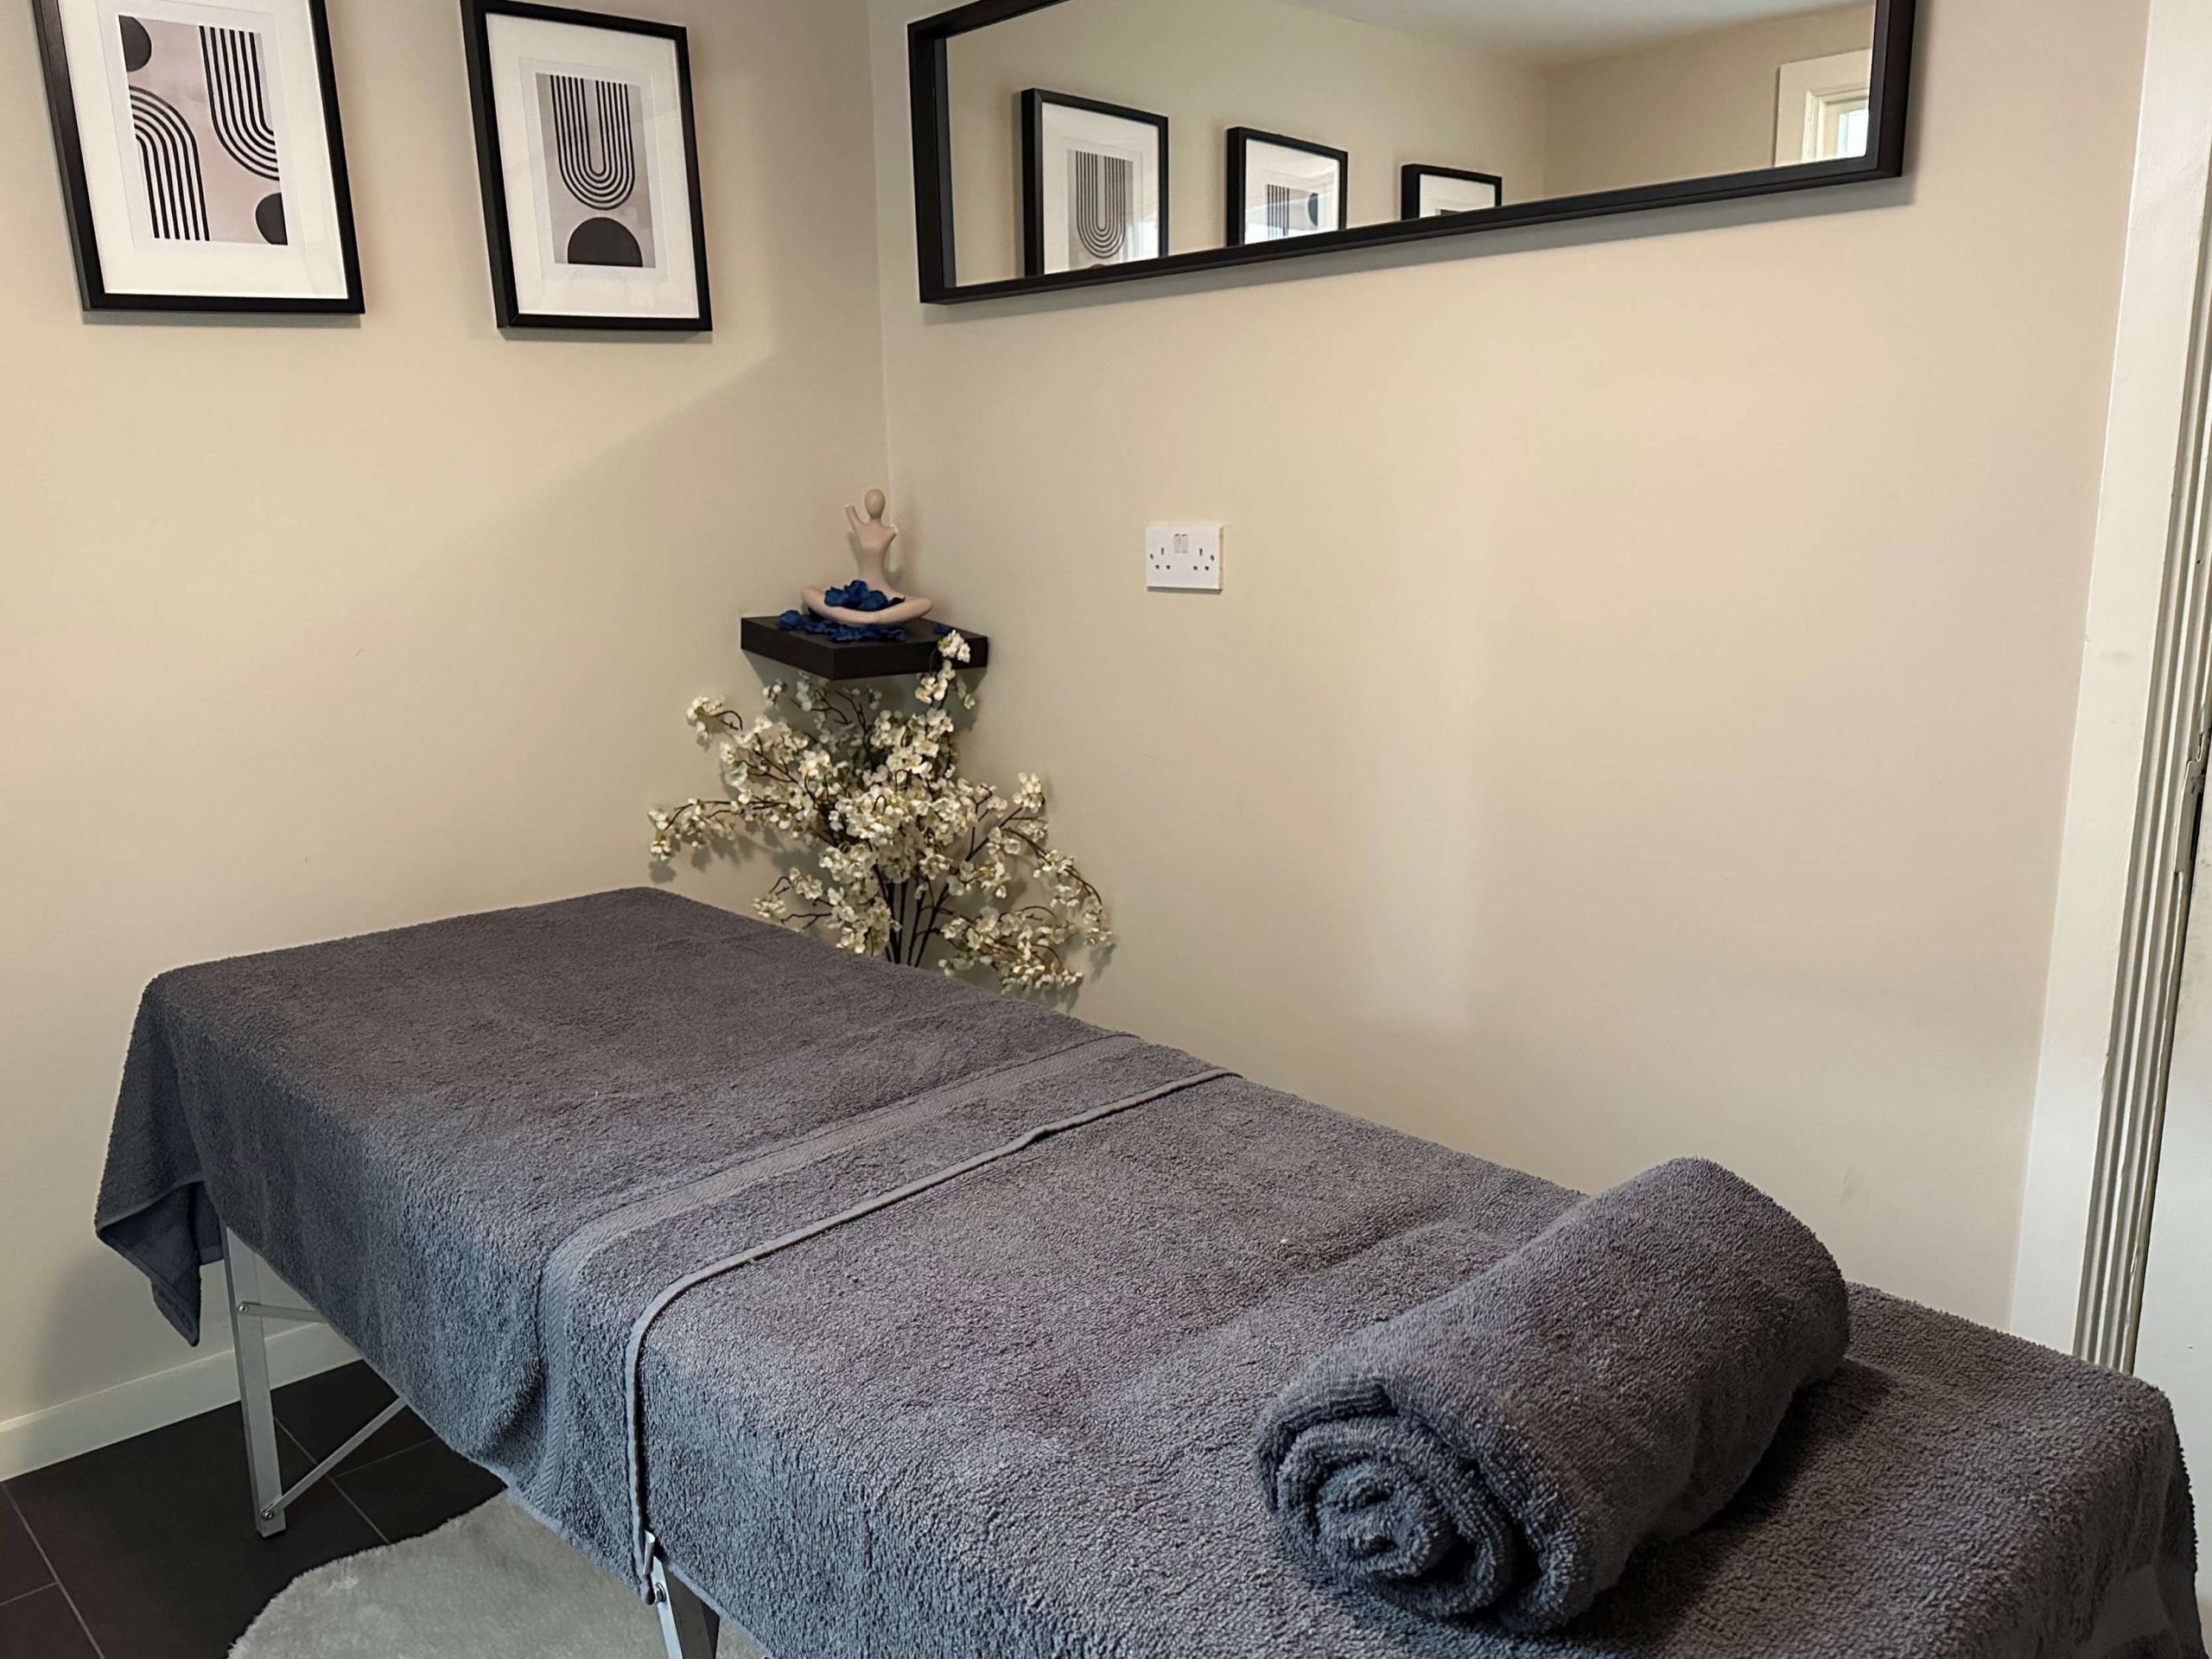 Massage/ Therapy/Treatment Room For Rent - in Wembley, England